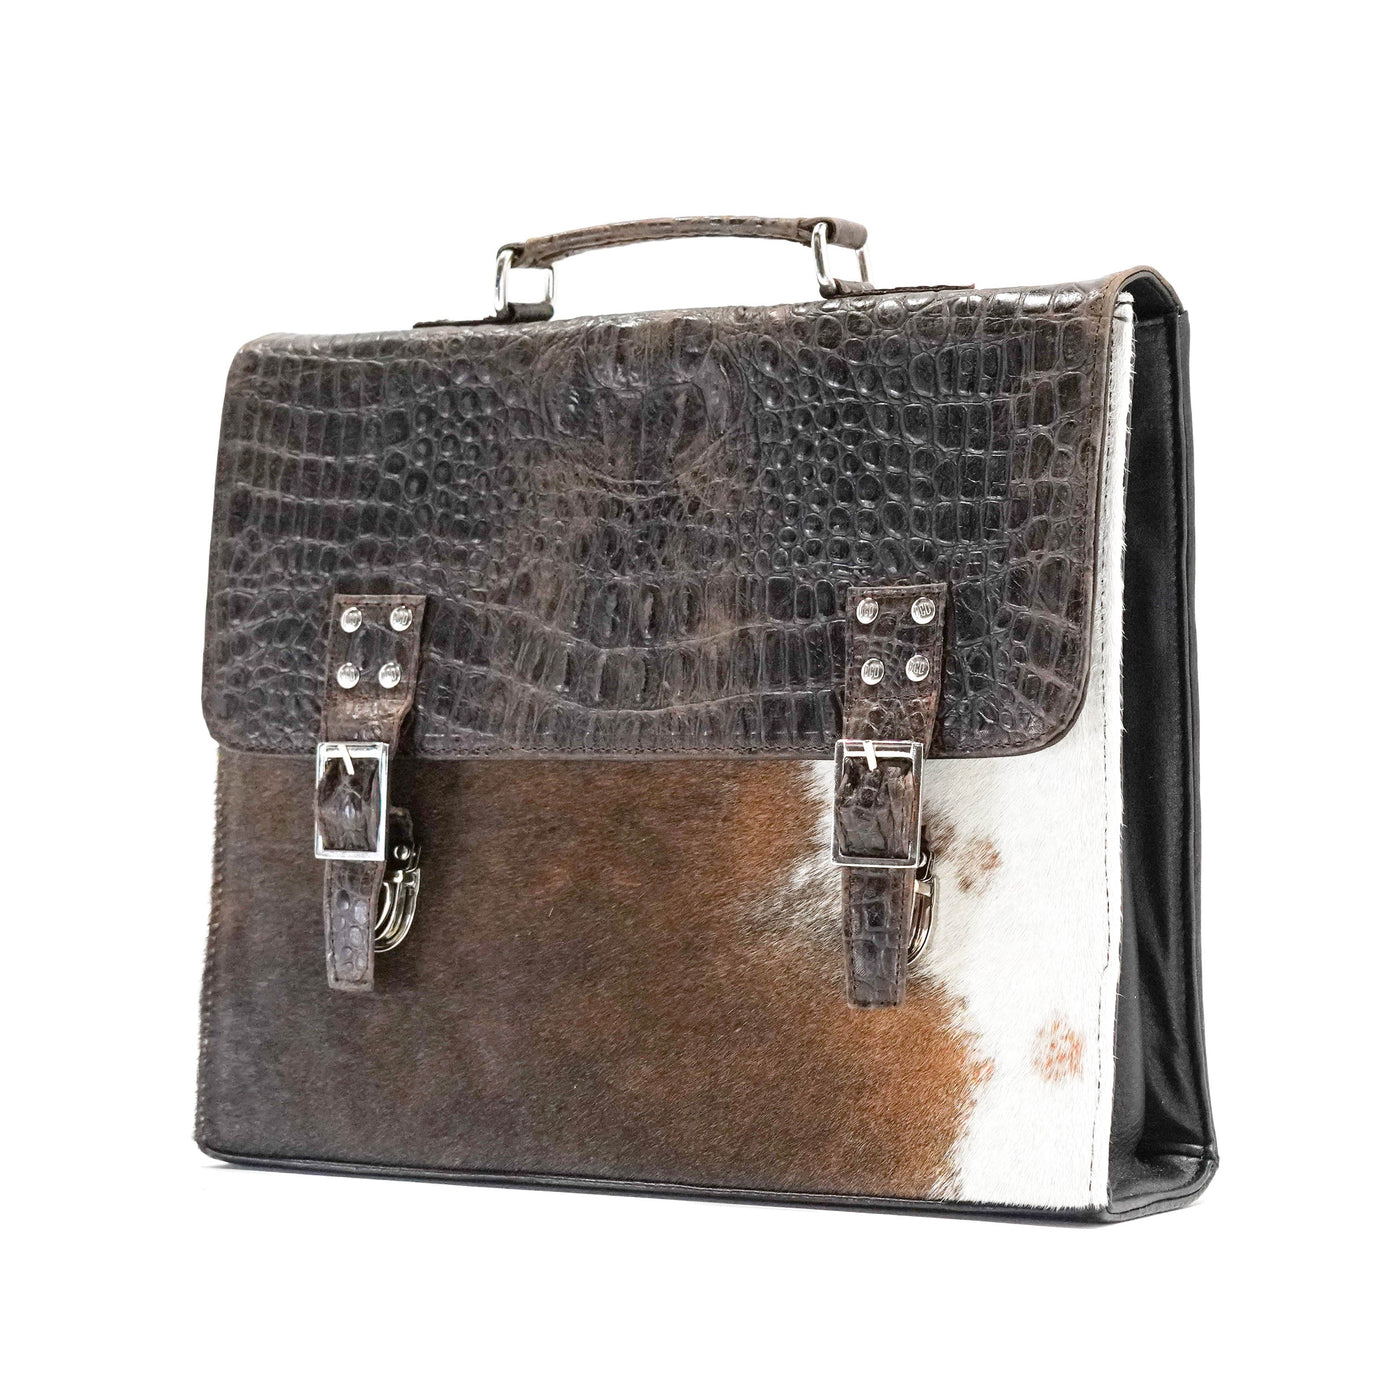 Briefcase - Chocolate & White w/ SPF Croc-Briefcase-Western-Cowhide-Bags-Handmade-Products-Gifts-Dancing Cactus Designs